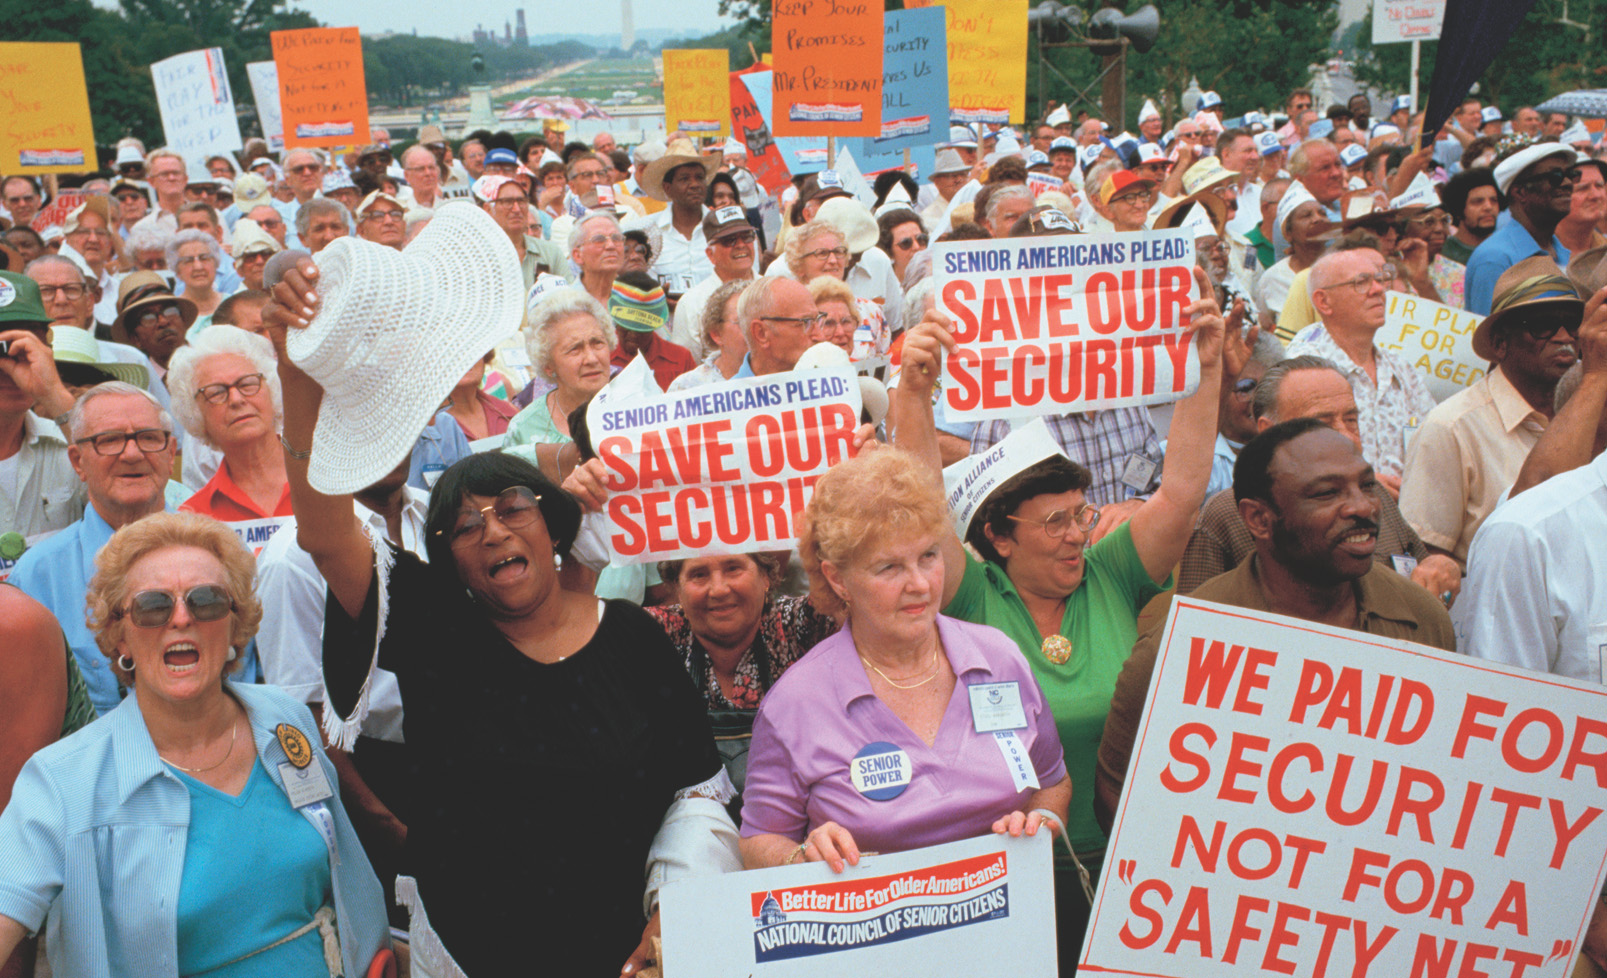 photo: elderly protesters carry signs that read 'Save Our Security' and 'We paid for security not for a Safety Net.'